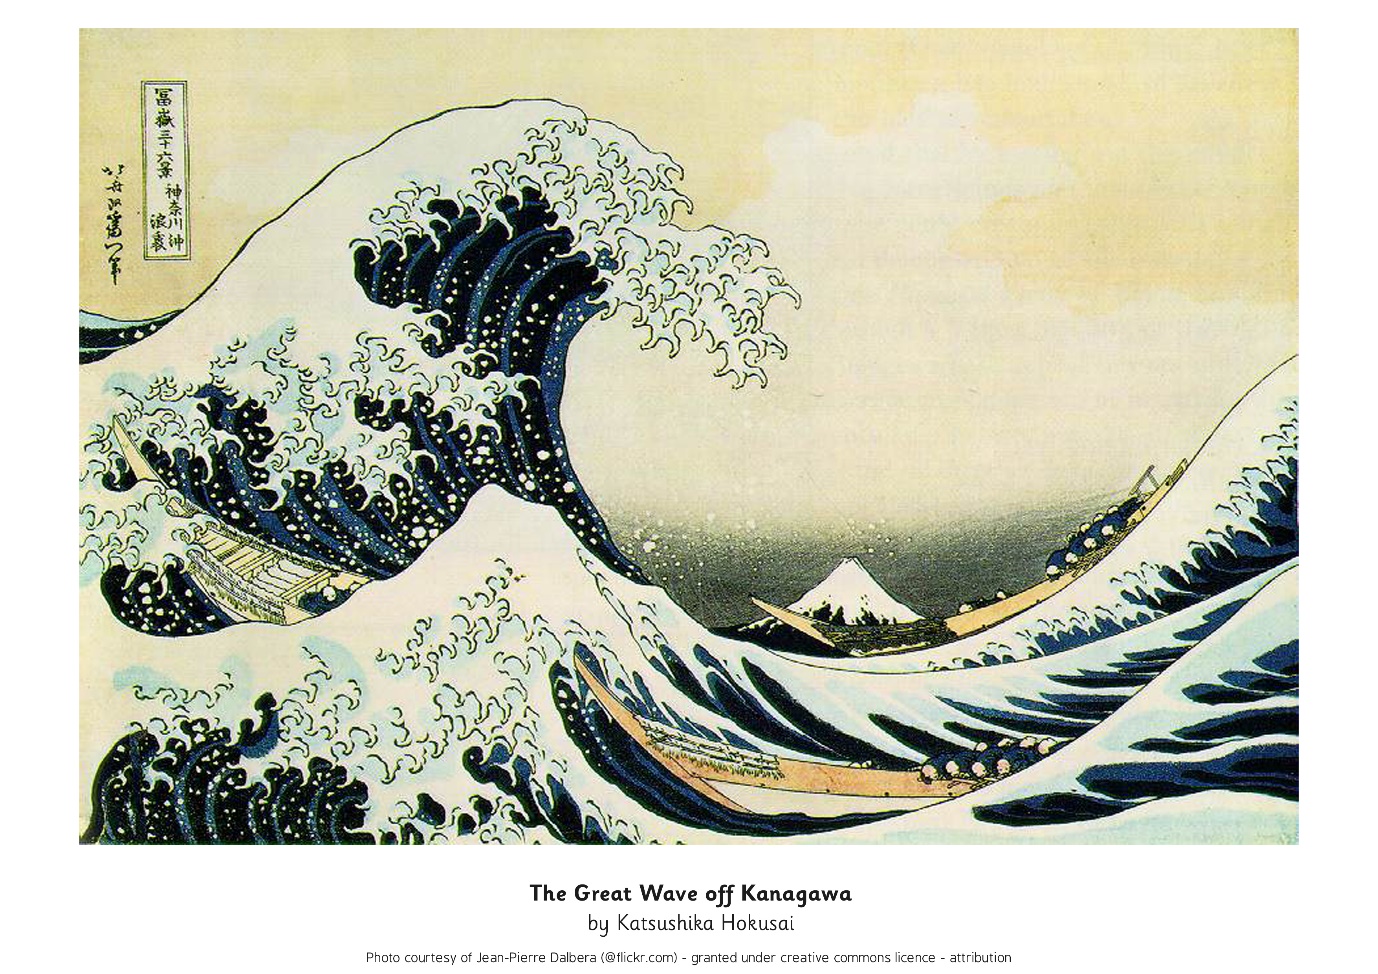 C:\Users\Administrator.1157-HPSTAFF-01\AppData\Local\Temp\Temp2_T2-A-082-Hokusai-Photo-Pack-and-Prompt-Questions_ver_1 (1).zip\Hokusai Photo Pack\The Great Wave off Kanagawa by Jean-Pierre Dalbéra .jpg